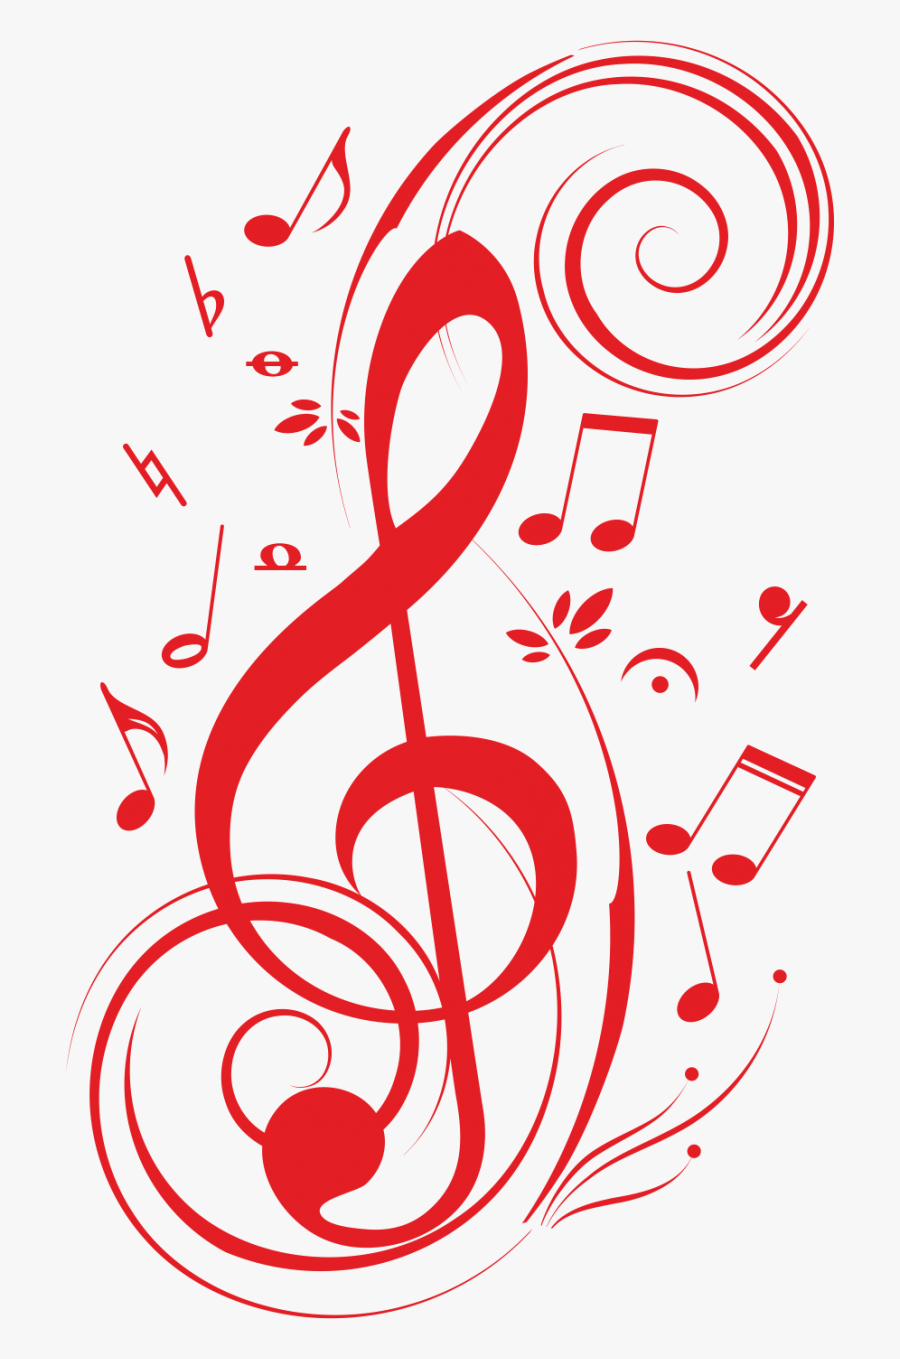 Musical Note Clef Clip Art Music Symbols Images Free Download , Free